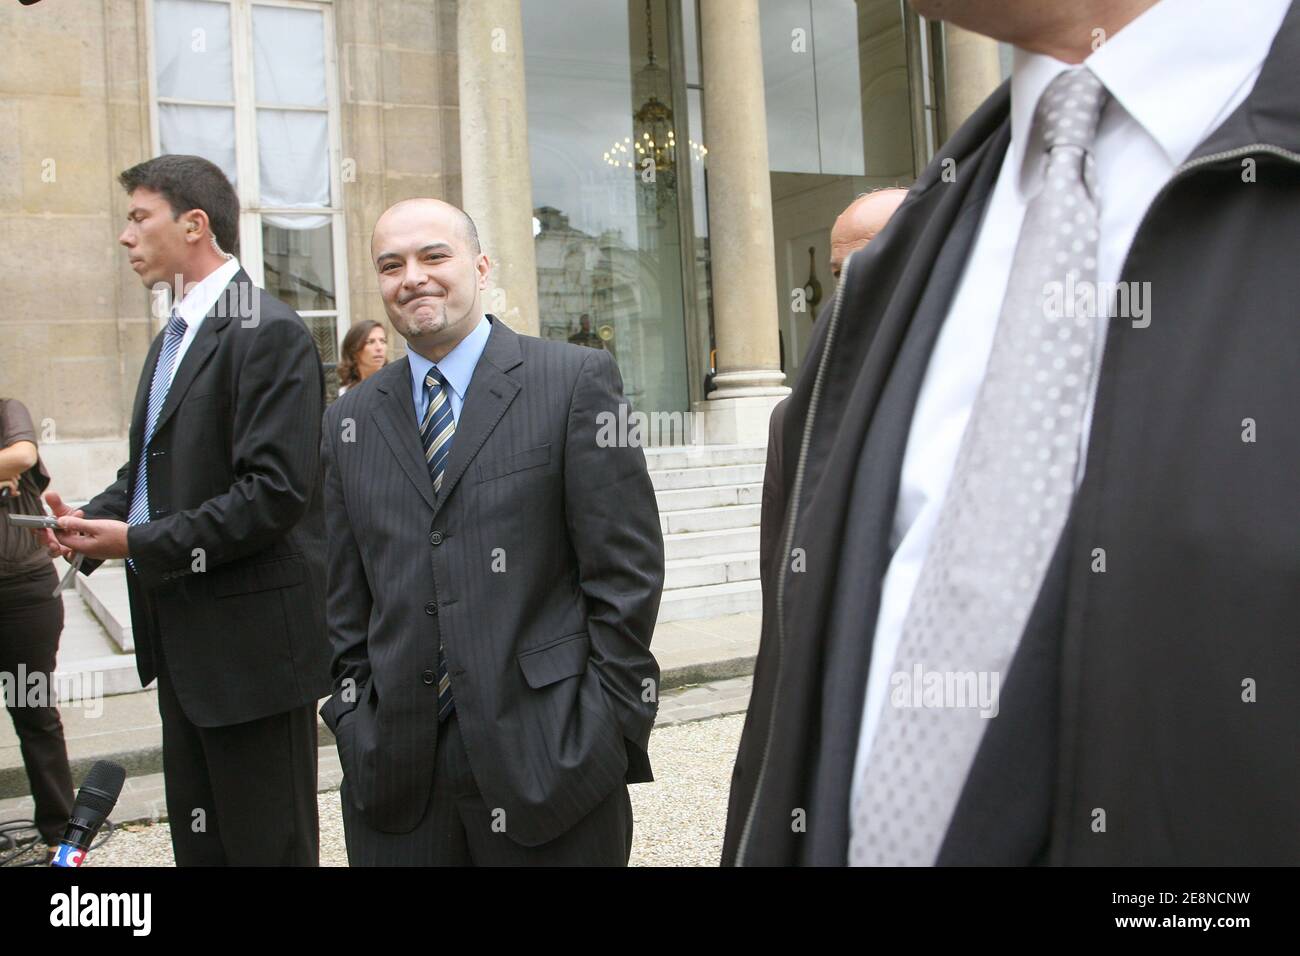 Enis'father, Mustapha Kocakurt, accompanied with his own father Turan, speak to the media after their private meeting with President Nicolas Sarkozy at the Elysee Palace in Paris, France on August 20, 2007. Enis was kidnaped and raped by a serial paedophile, who was just released from jail, last week. Photo by Mehdi Taamallah/ABACAPRESS.COM Stock Photo